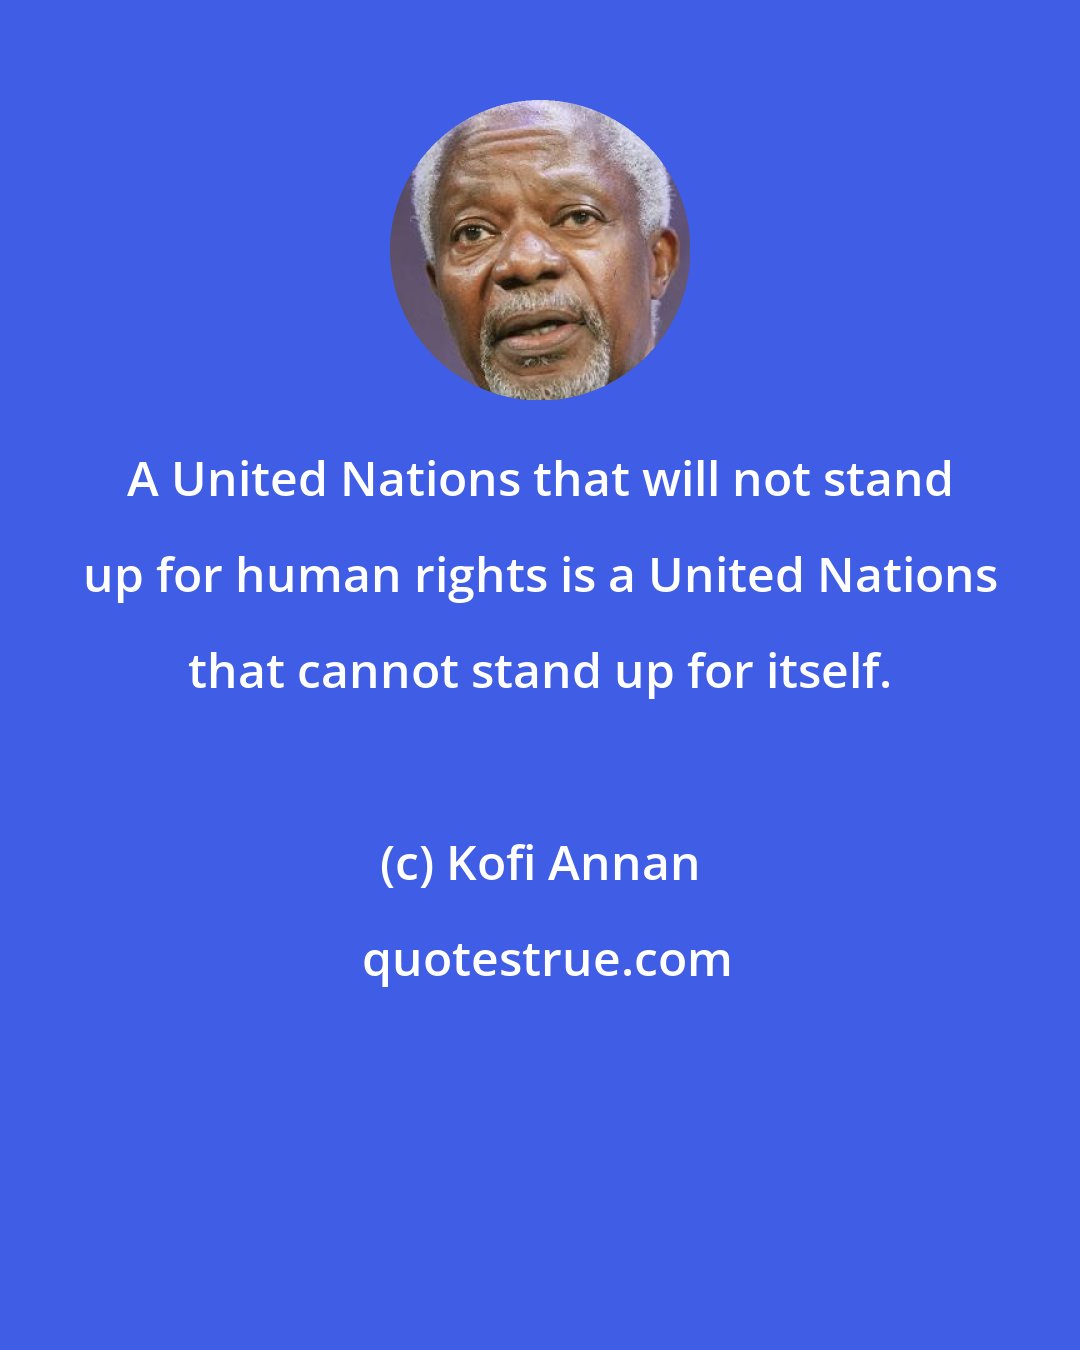 Kofi Annan: A United Nations that will not stand up for human rights is a United Nations that cannot stand up for itself.